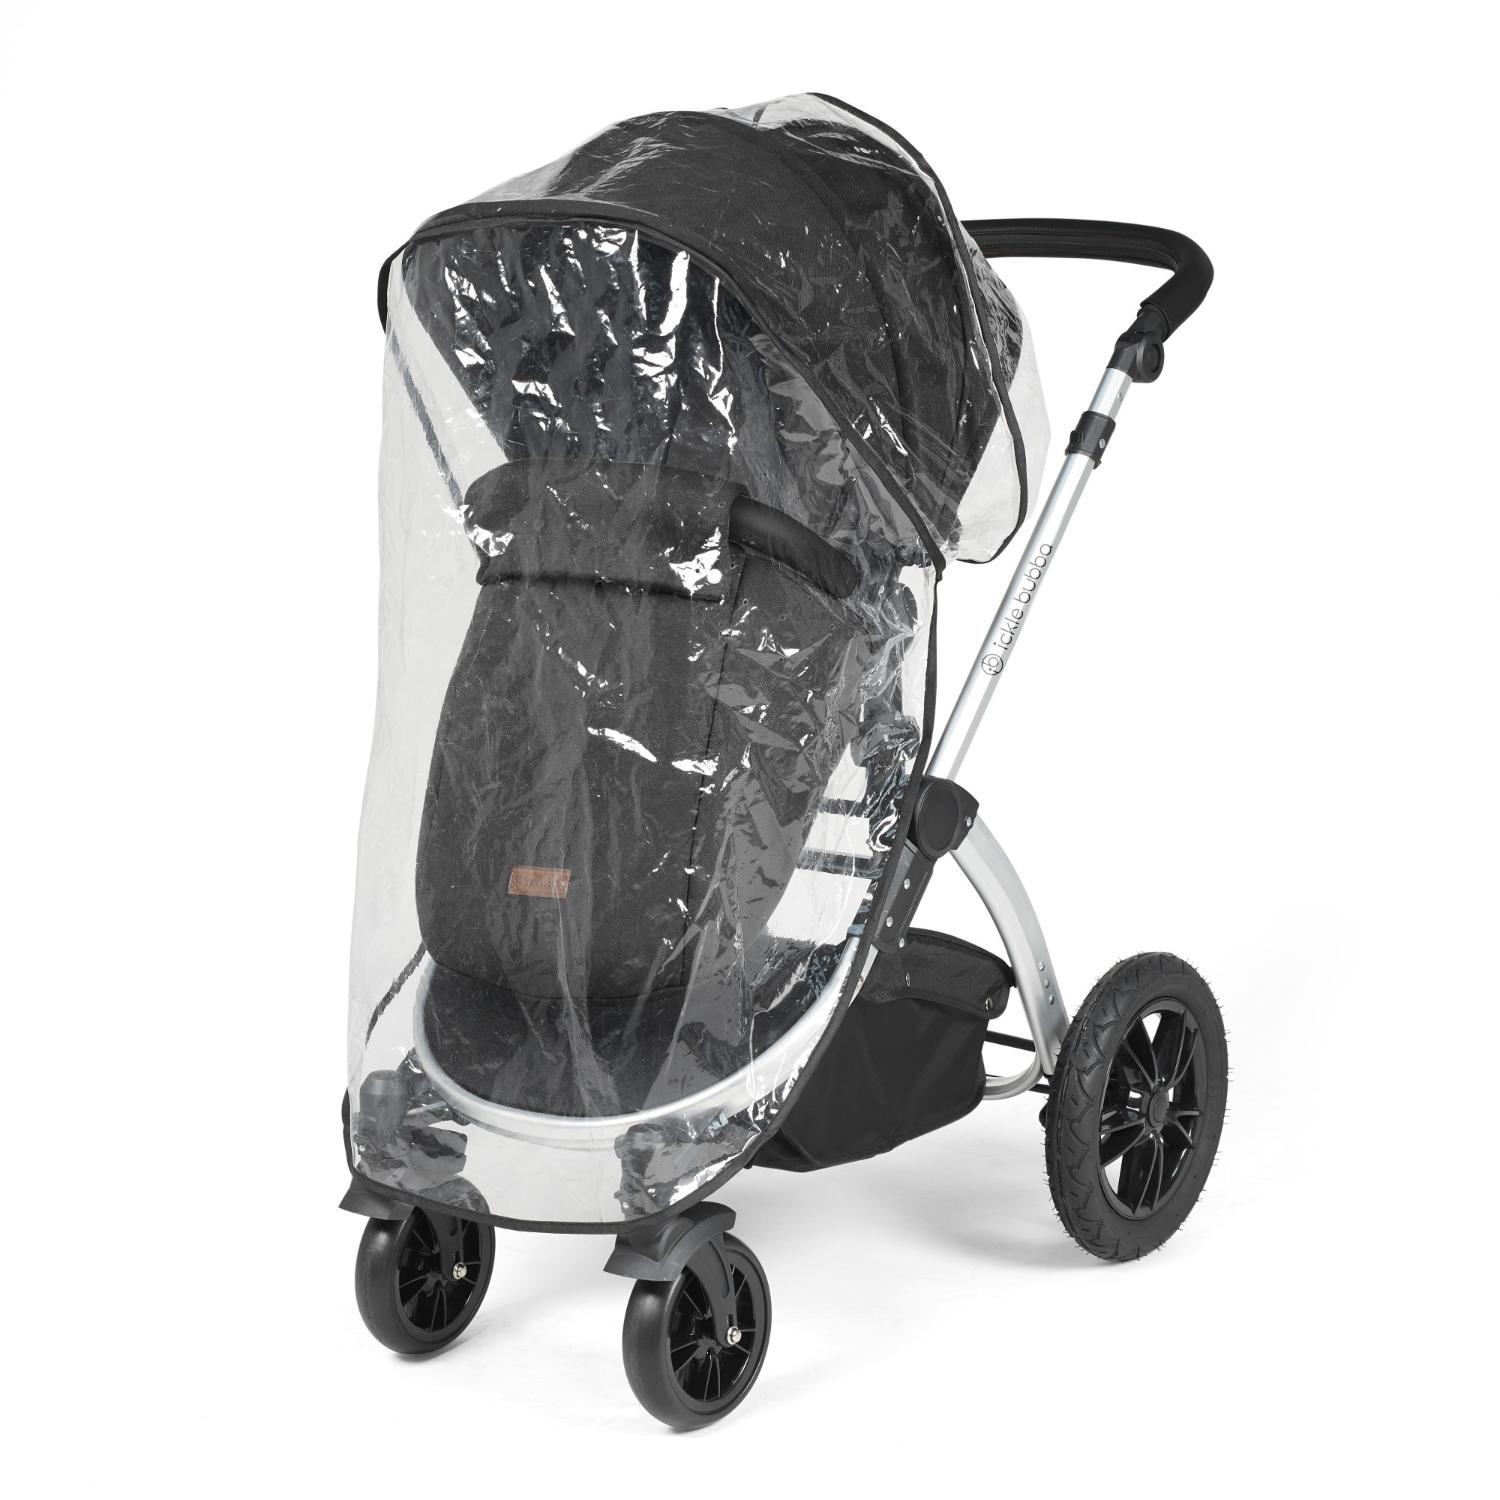 Rain cover placed on an Ickle Bubba Stomp Luxe Pushchair in Midnight black colour with silver chassis